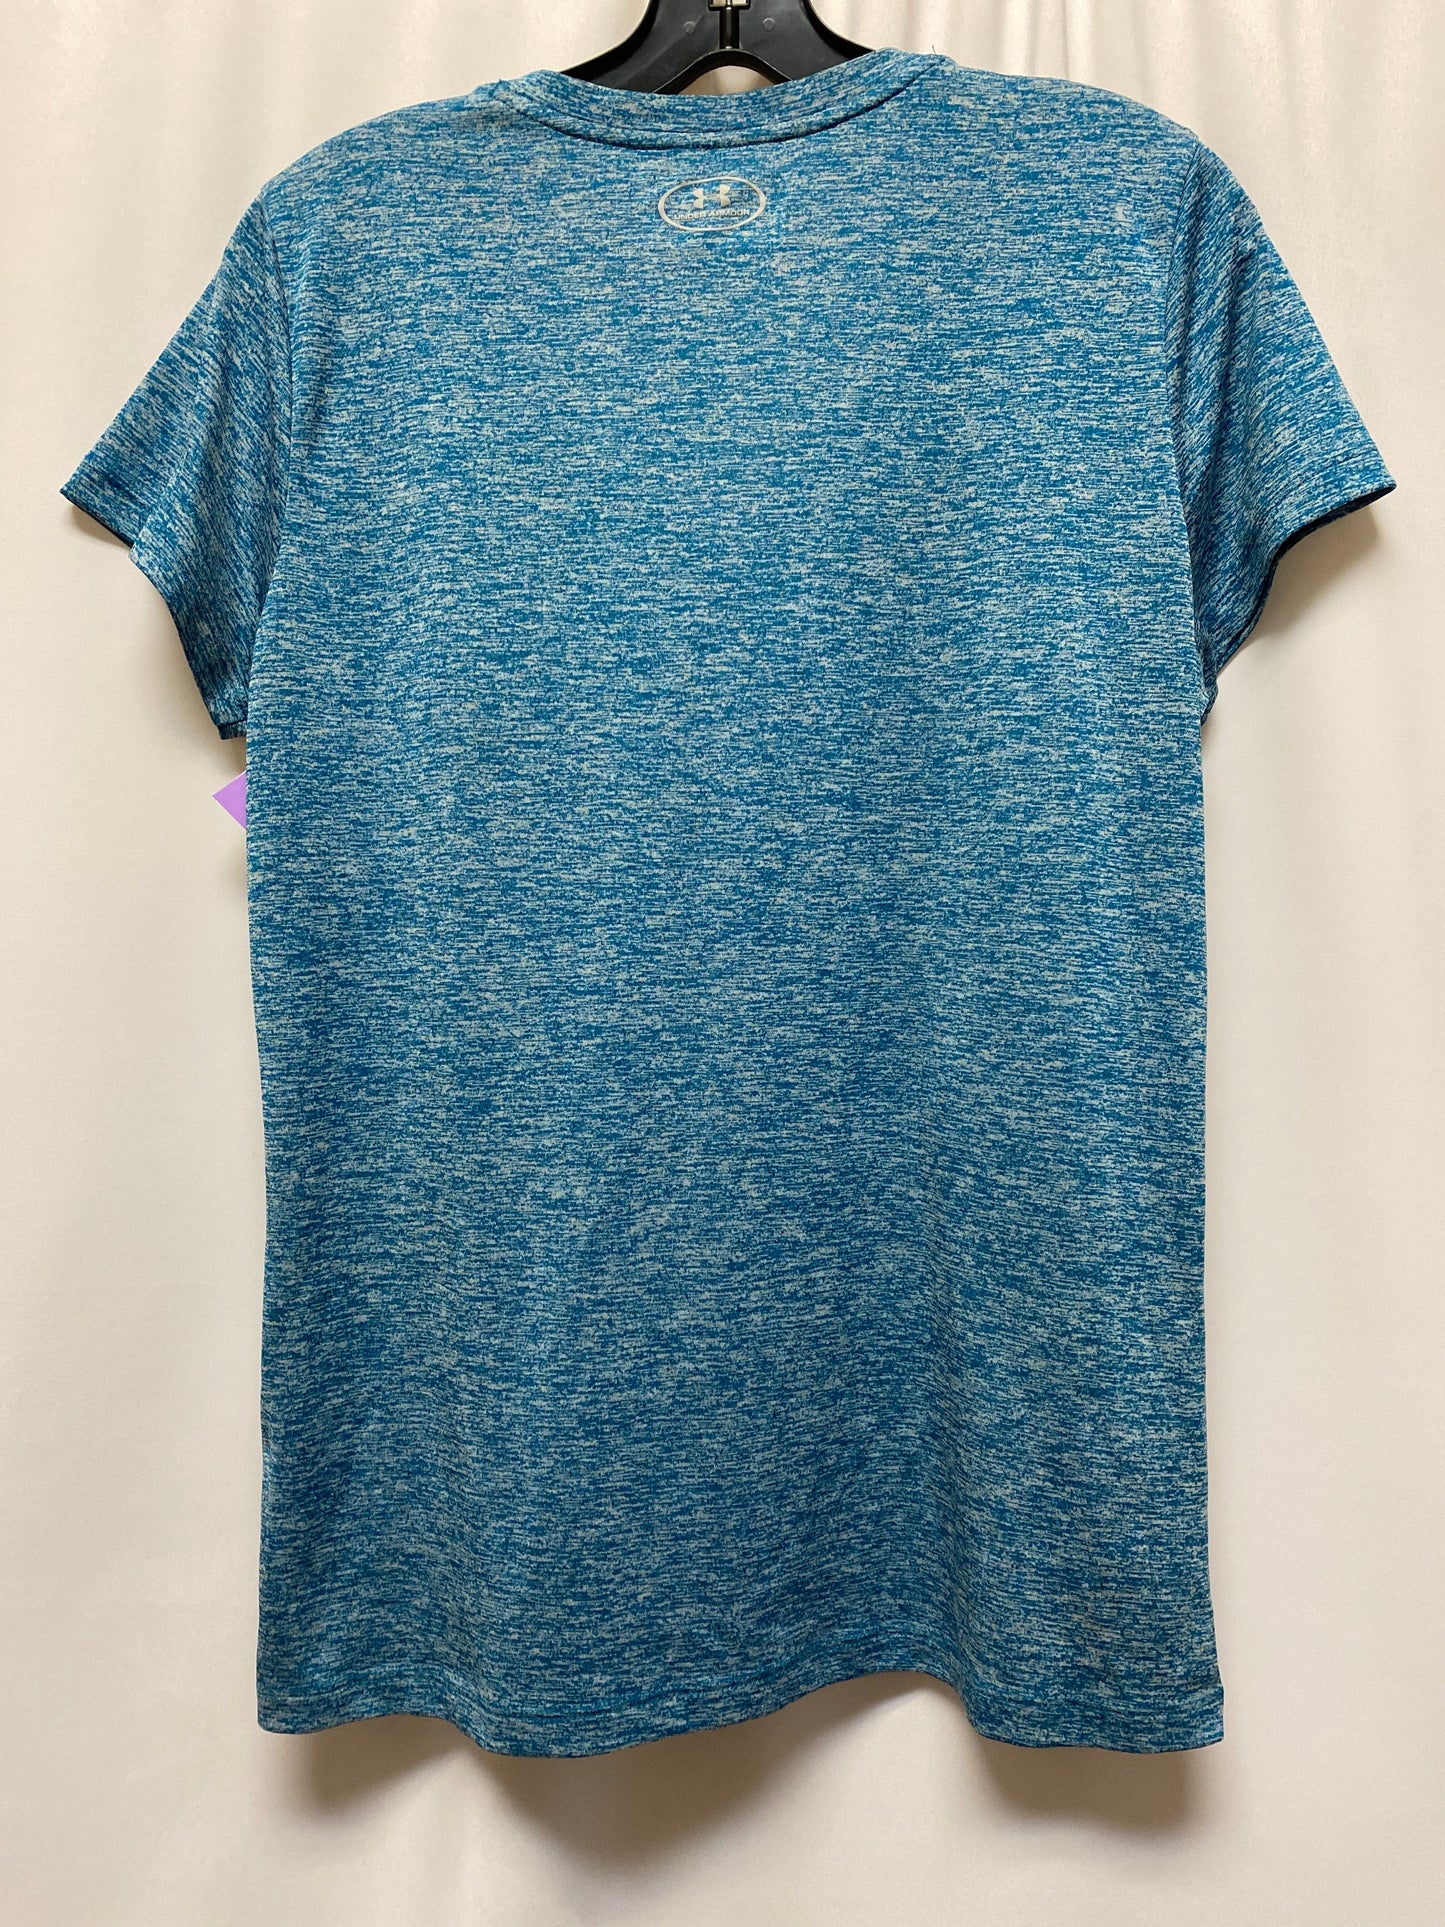 Blue Athletic Top Short Sleeve Under Armour, Size M